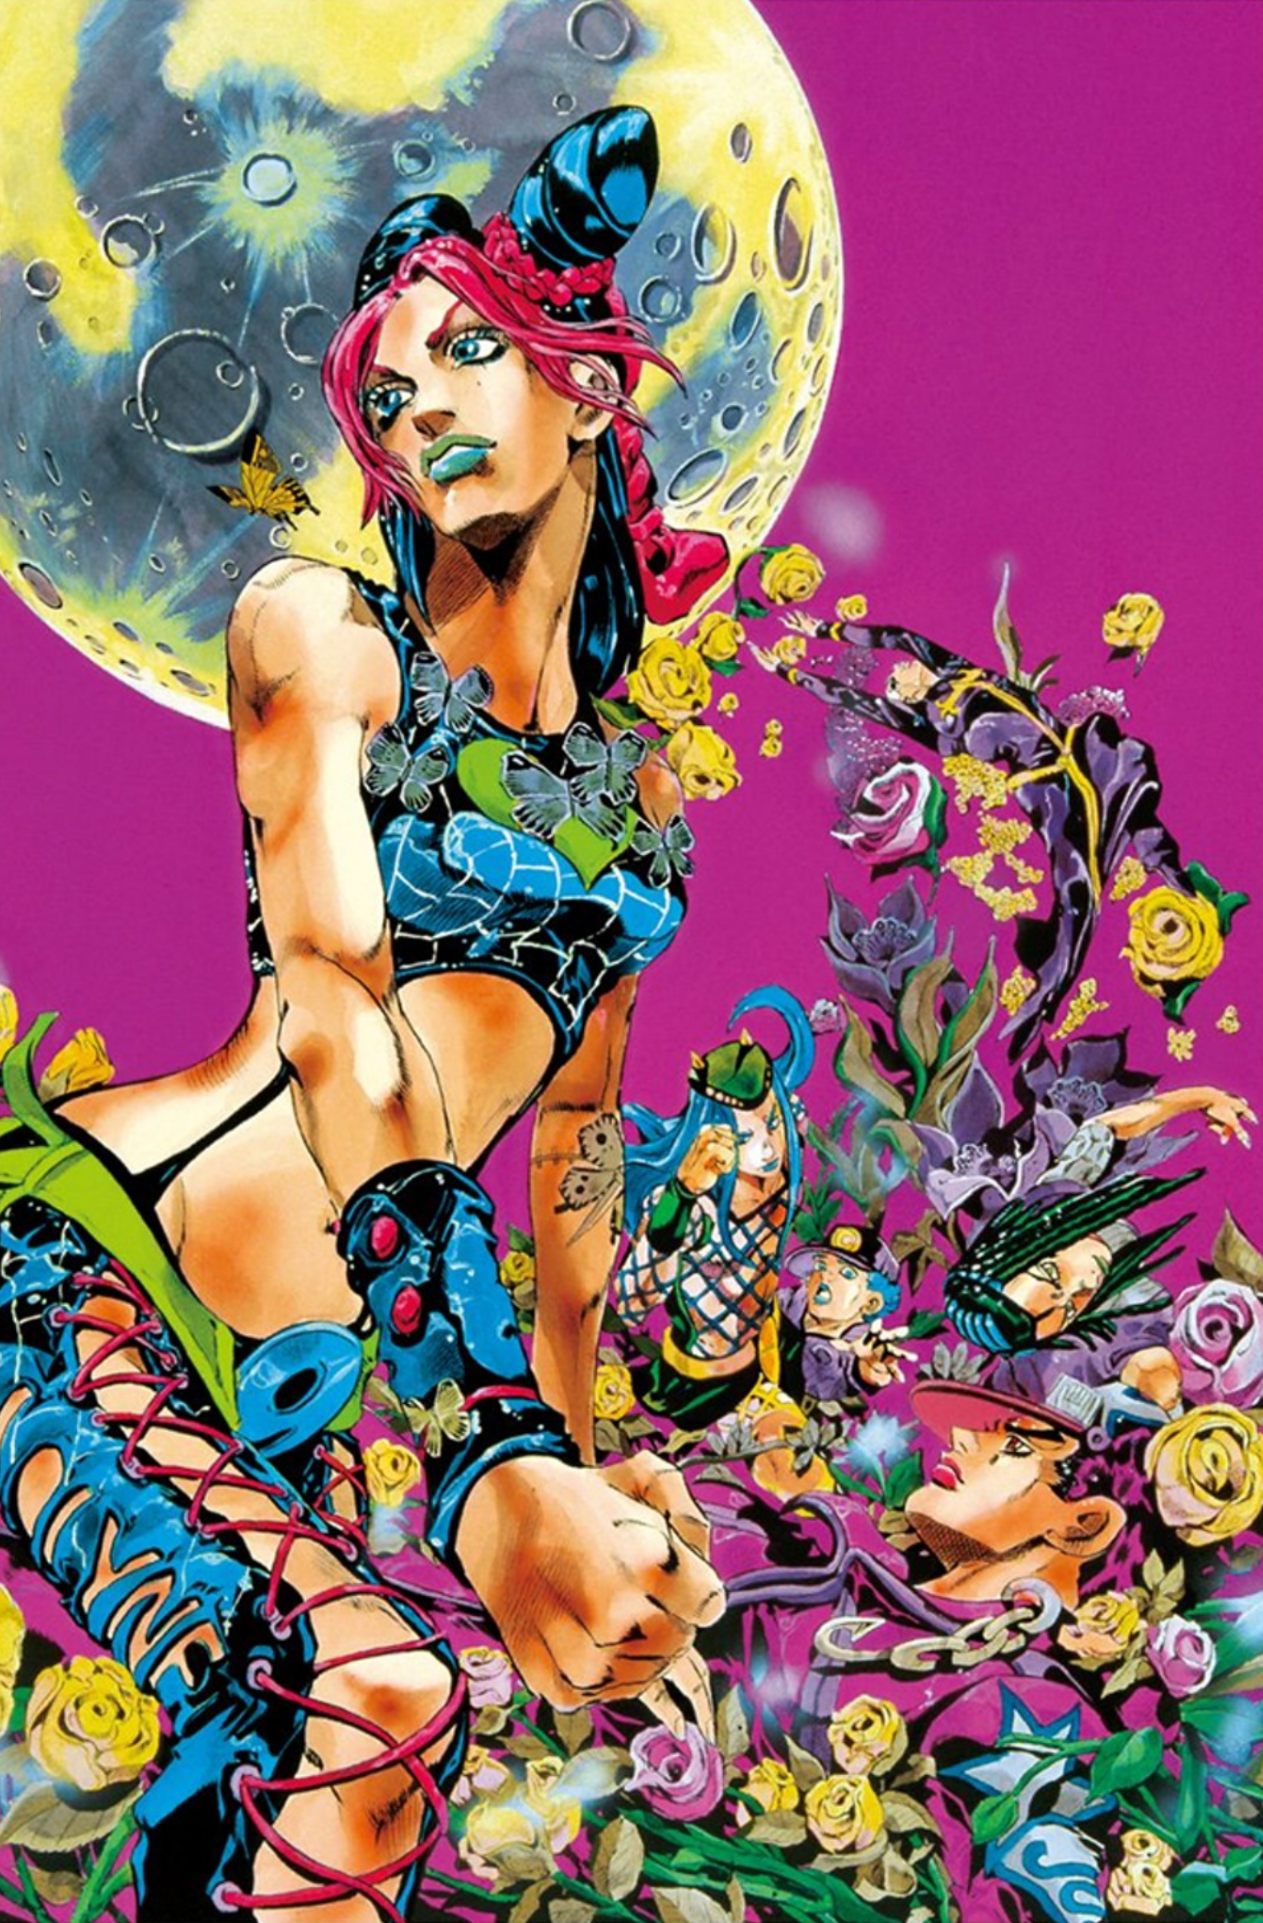 Who's your favorite character from Stone Ocean? 